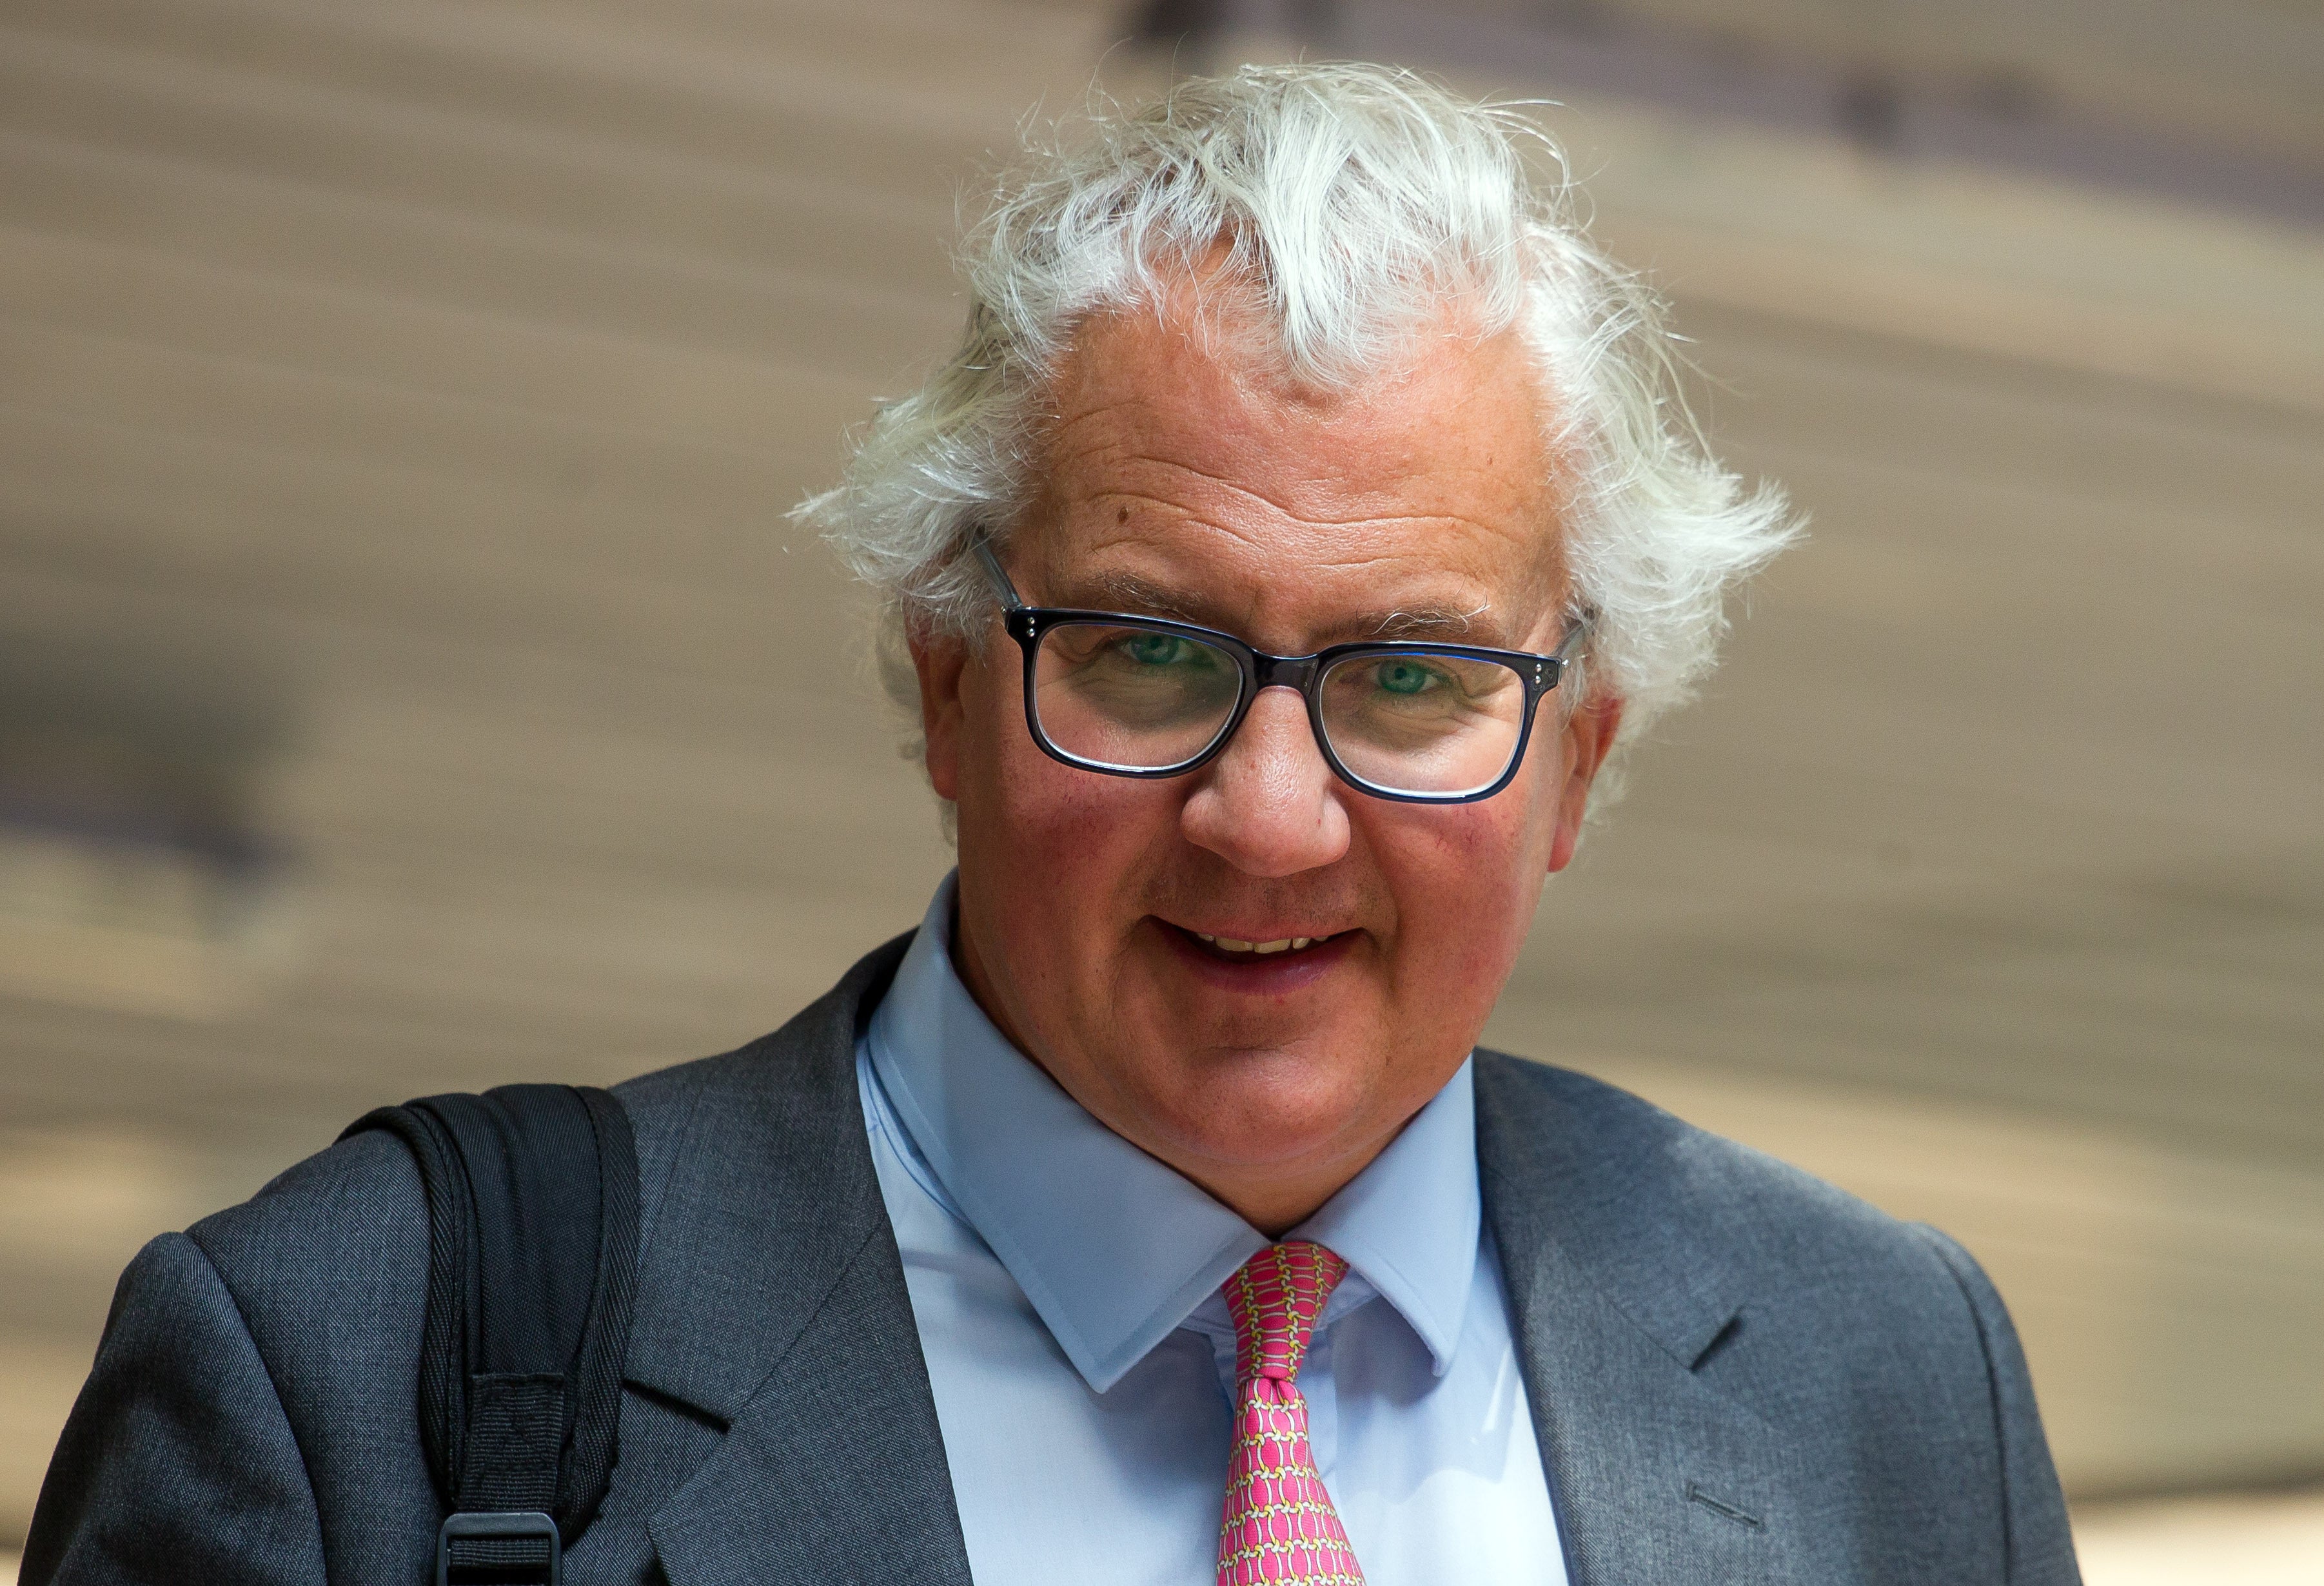 Alexander Cameron (pictured) is the brother of former prime minister David Cameron